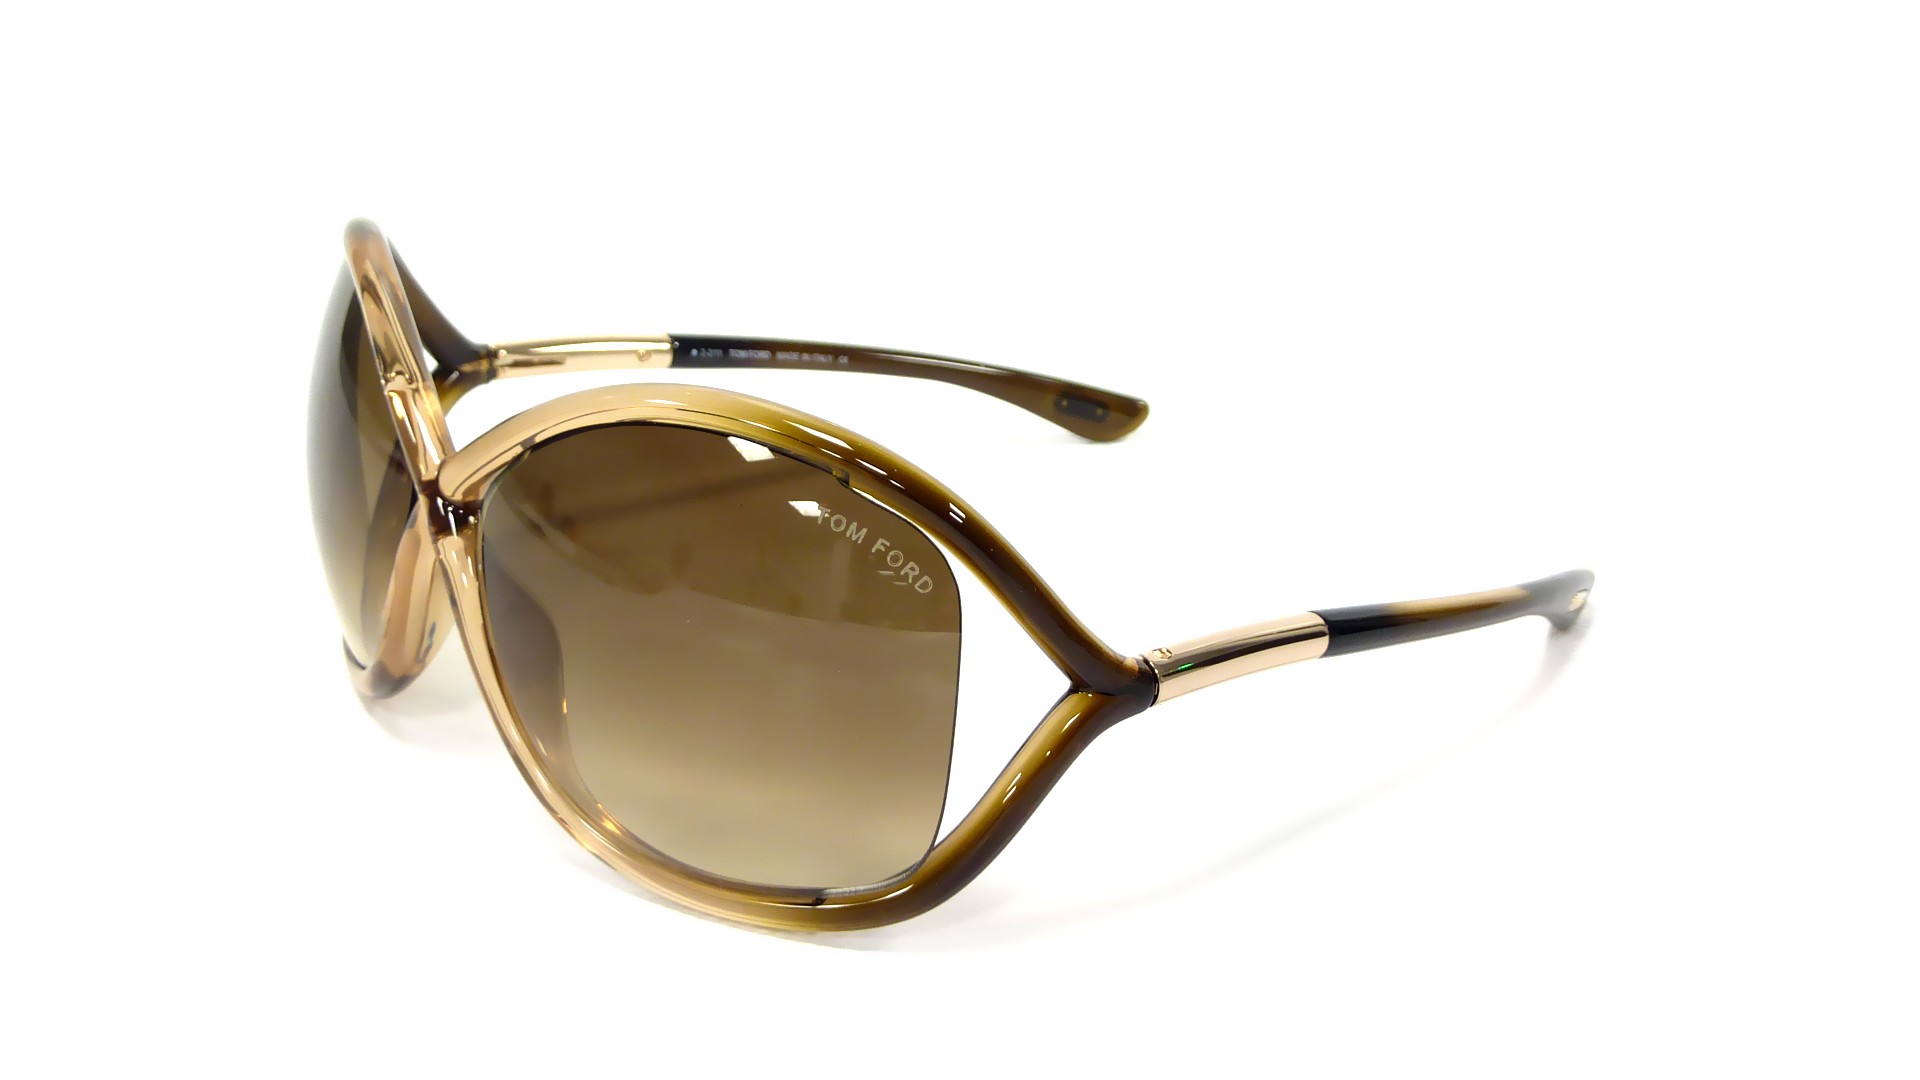 Tom ford whitney sunglasses brown